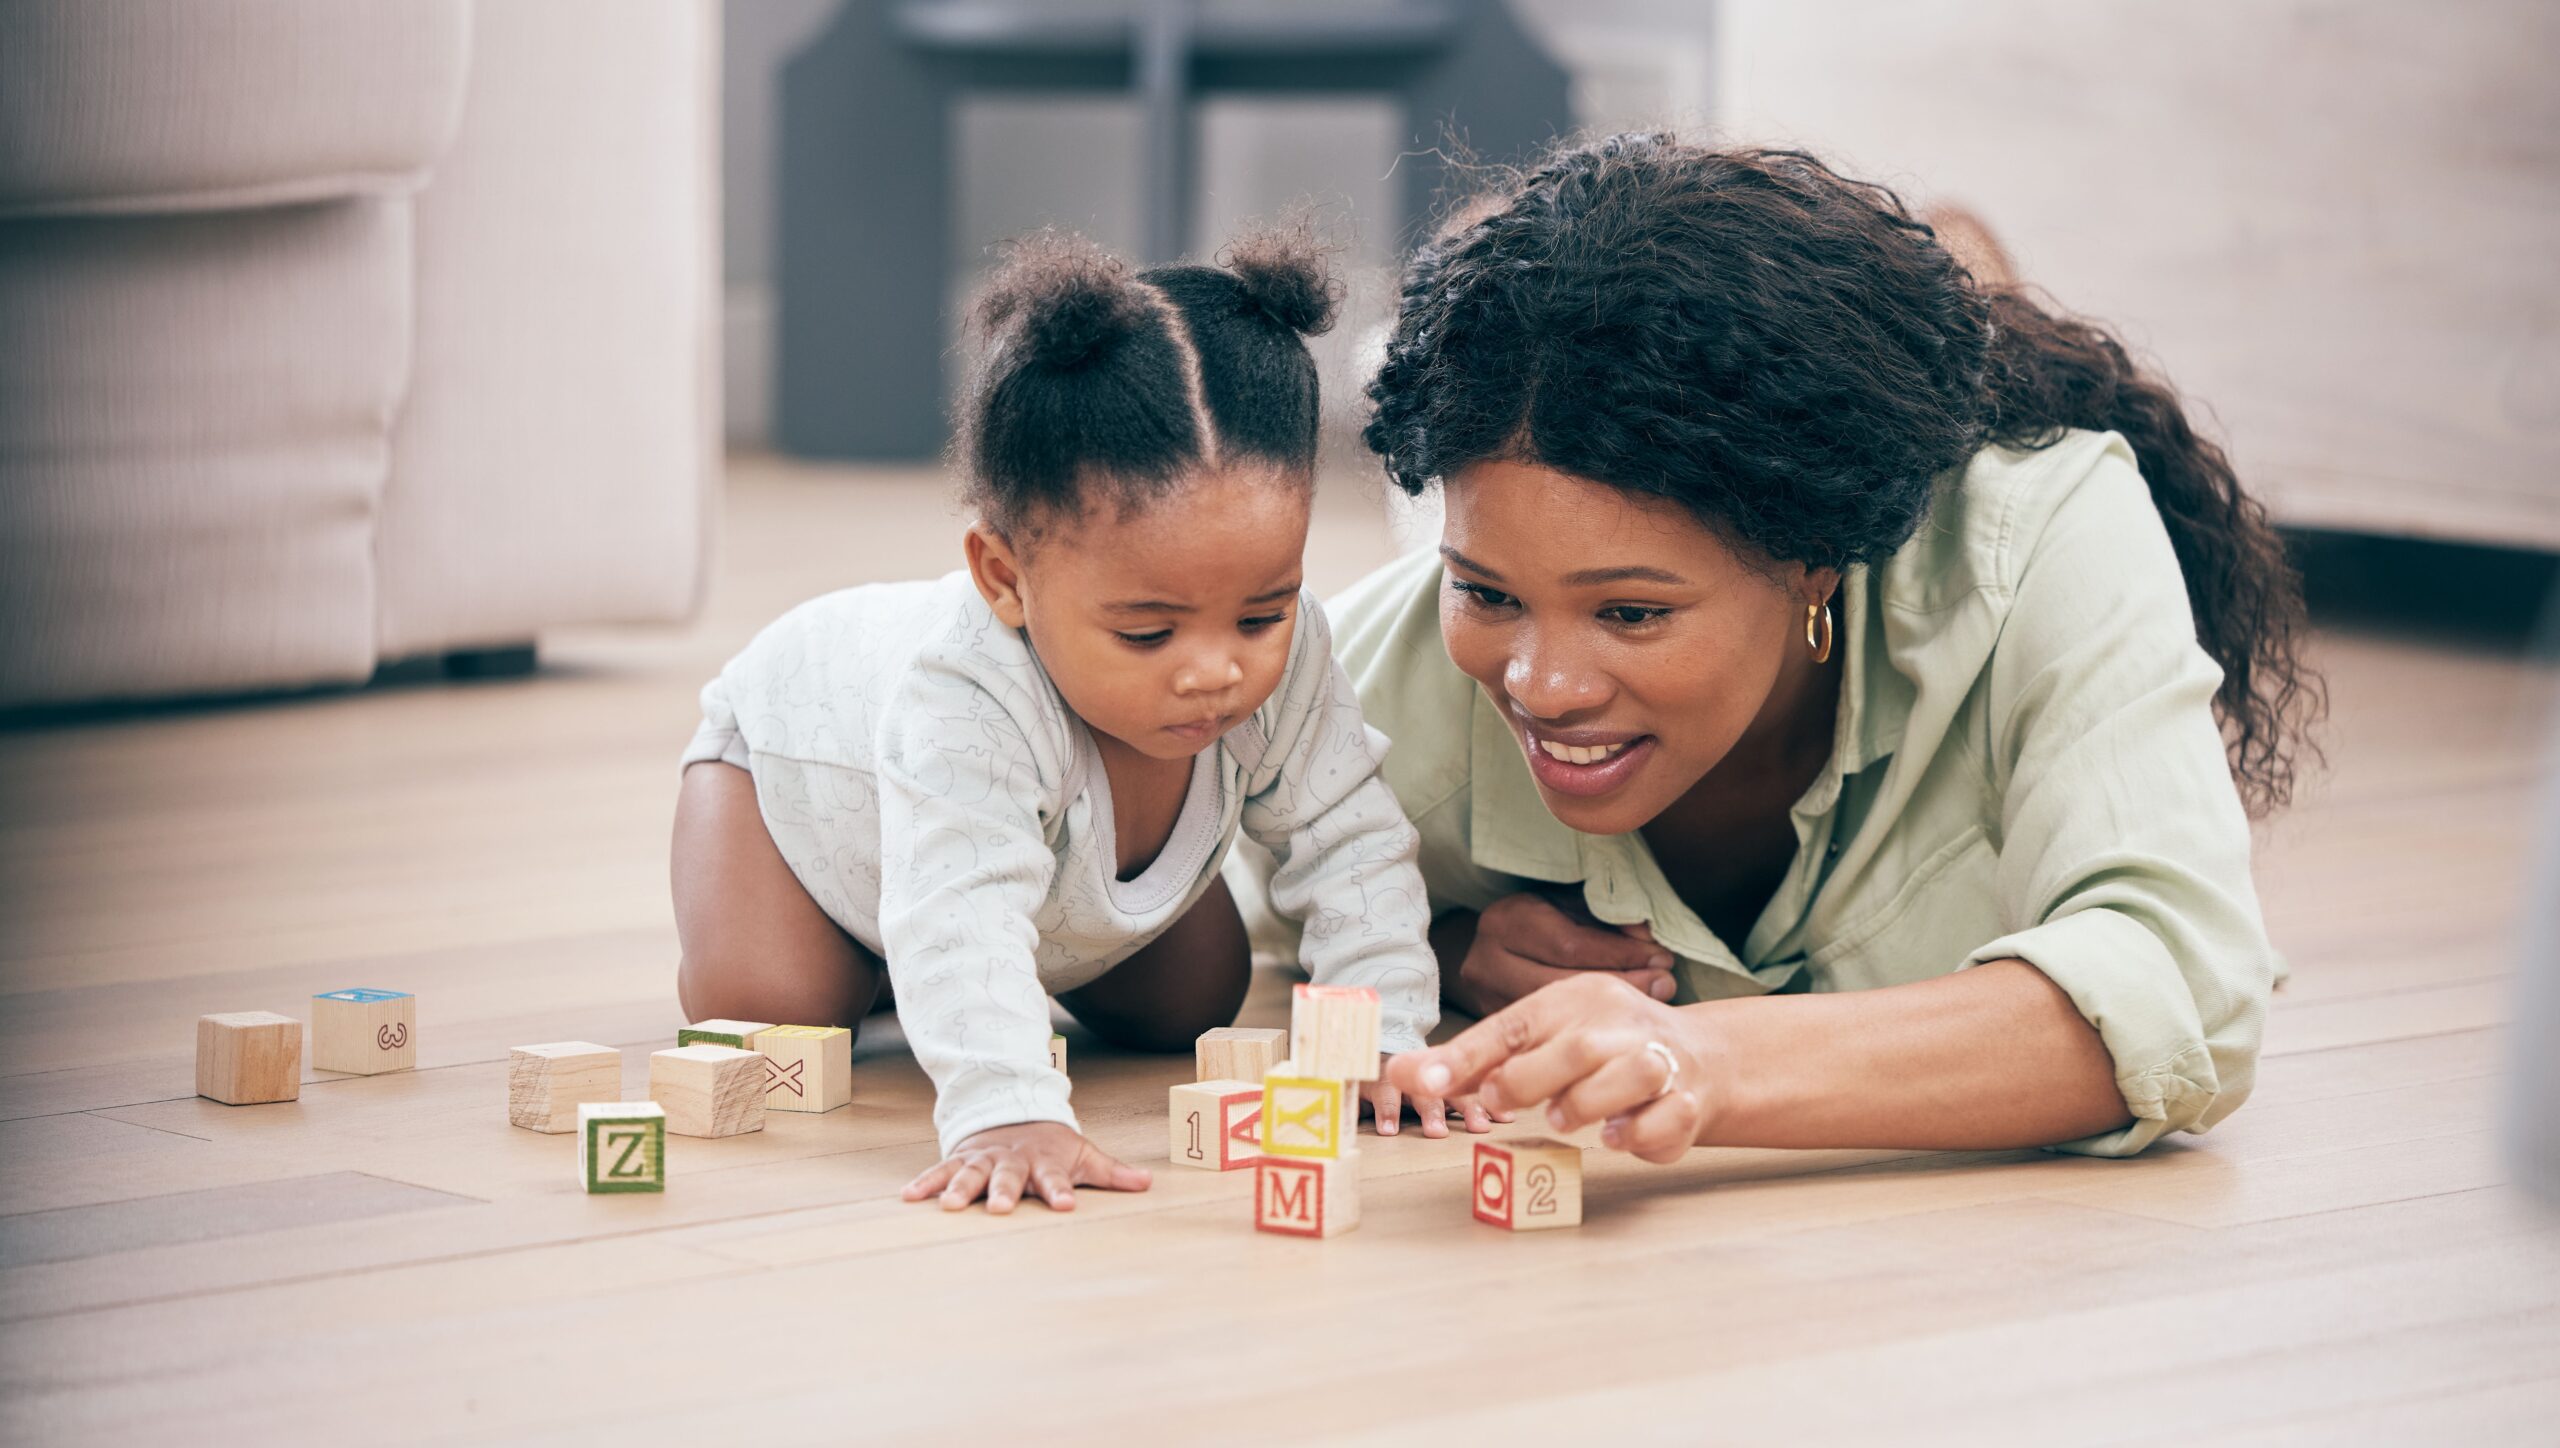 A mother is playing with her child using building blocks to improve childhood development.